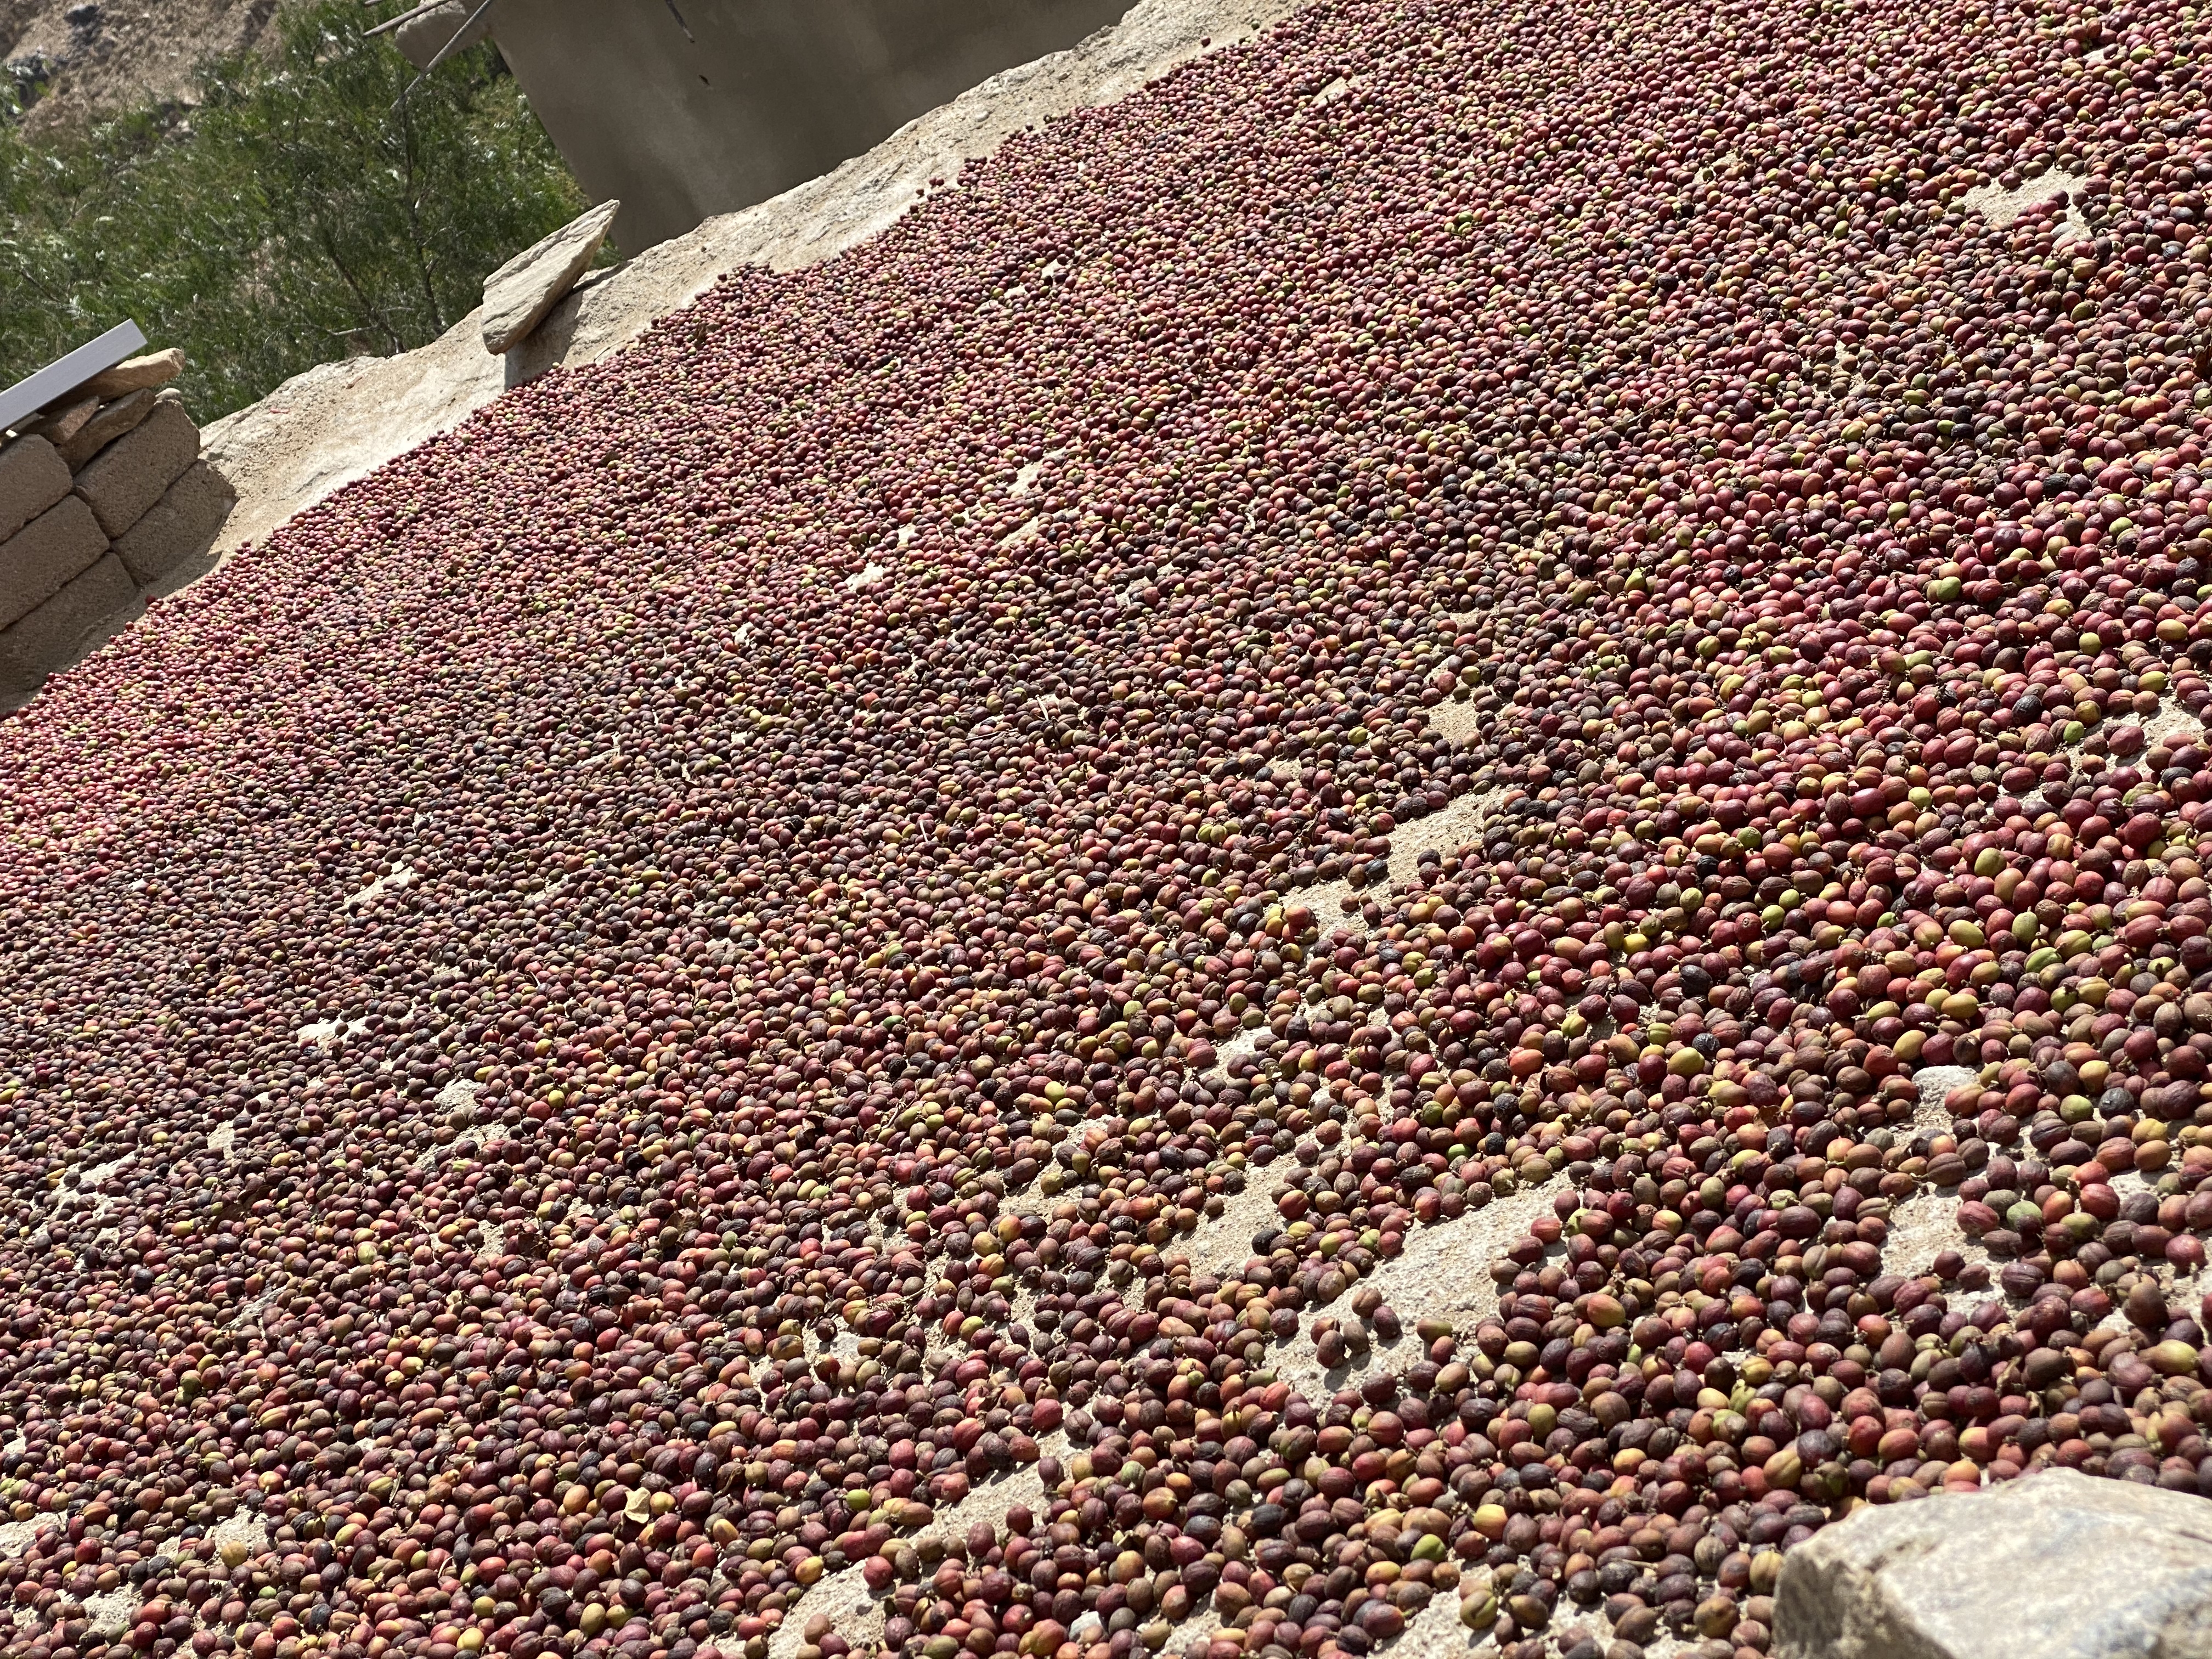 The coffee cherries at Al-Enab drying on top of the roof